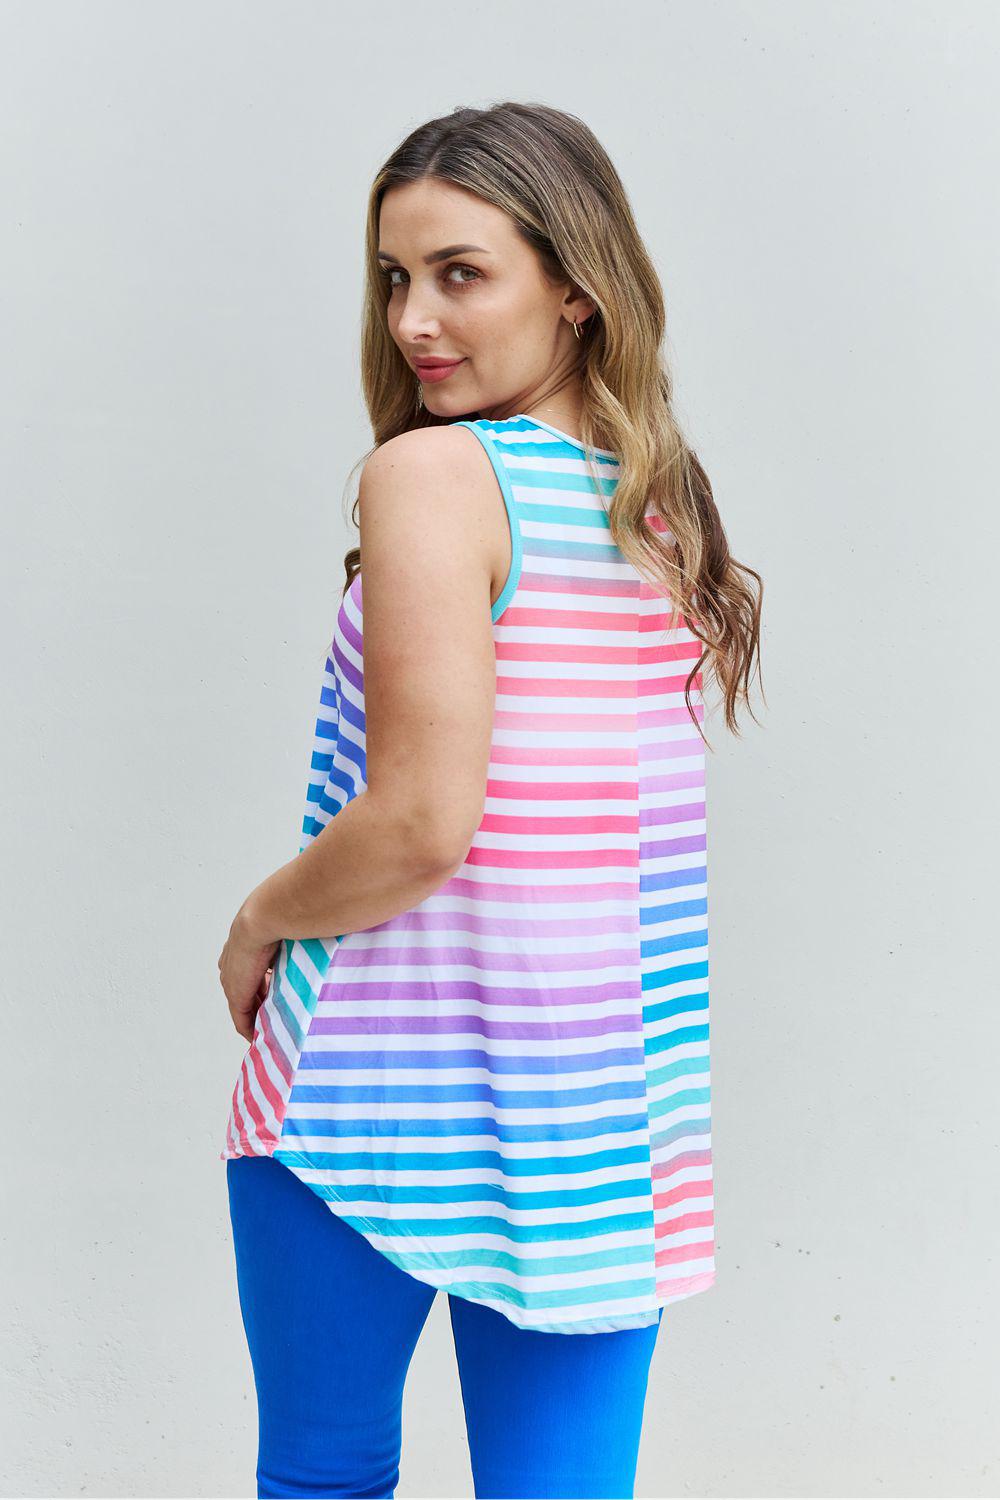 Heimish Love Yourself Full Size Multicolored Striped Sleeveless Round Neck Top BLUE ZONE PLANET